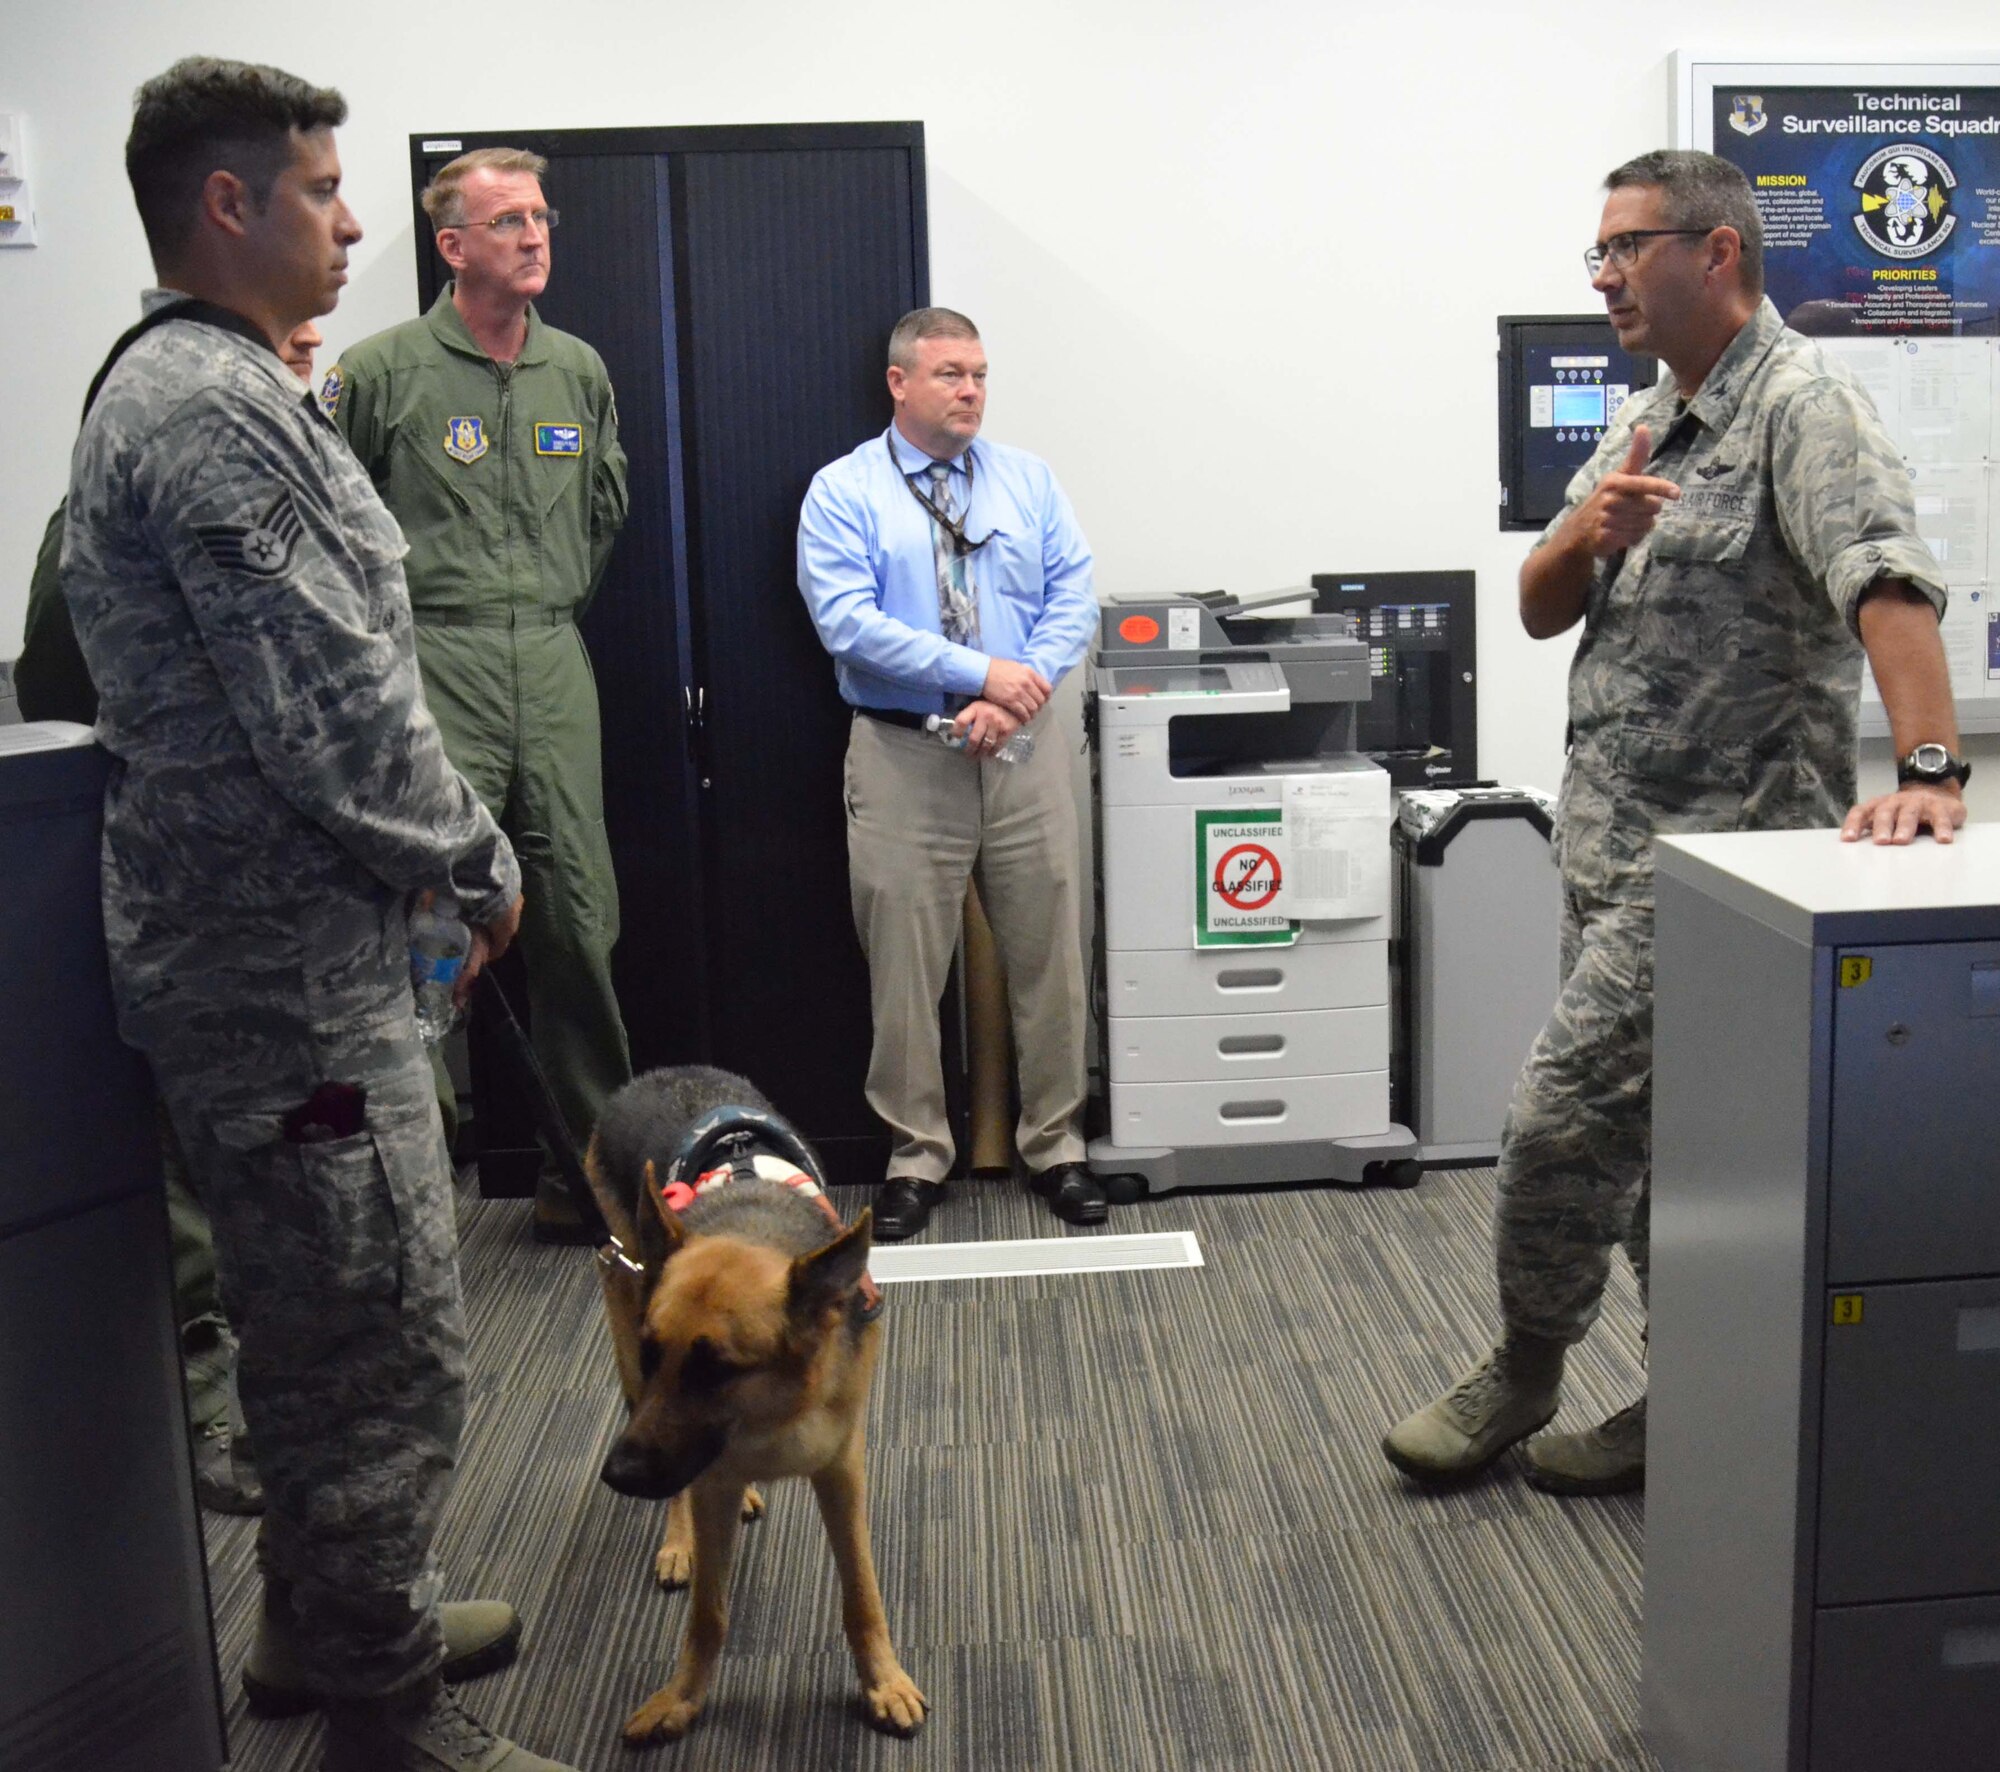 Col. Jon VanNoord (right), director of operations for the Air Force Technical Applications Center, Patrick AFB, Fla., briefs Staff. Sgt. August O’Niell (left), the Air Force’s first pararescue amputee, during O’Niell’s visit to the nuclear treaty monitoring center May 22, 2017.  Pictured with O’Niell is his service dog and constant companion, Kai.  (U.S. Air Force photo by Susan A. Romano)